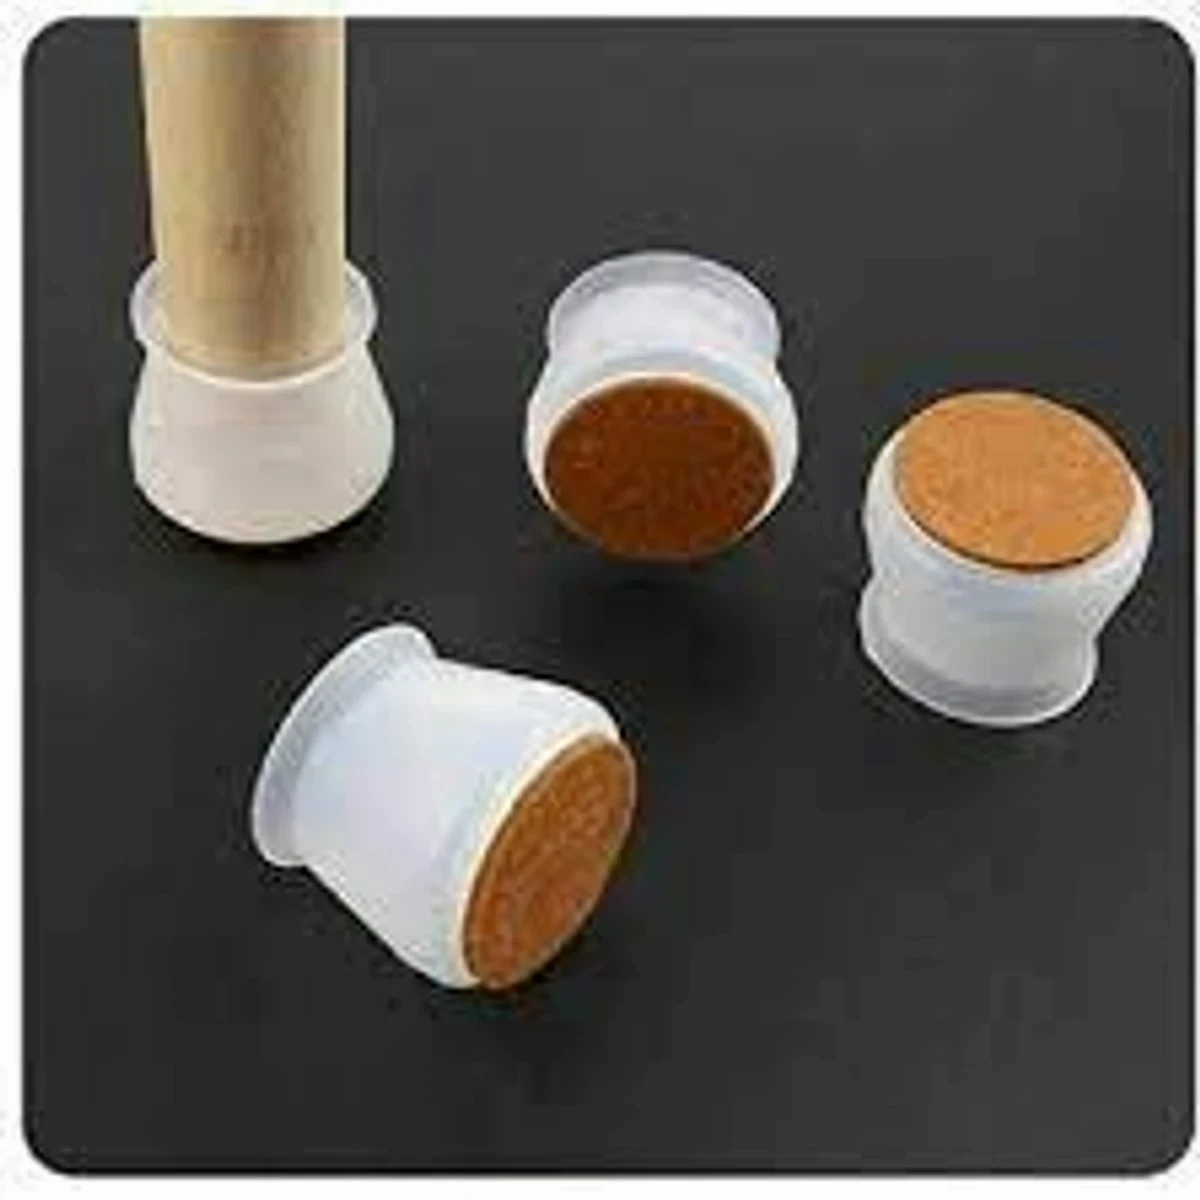 28 pcs Chair Leg Floor Protectors Felt Bottom Furniture Silicone Leg Caps, Chair Leg Covers to Reduce Noise, Easily Moving for Furniture Chair Feet,(coffee colour)